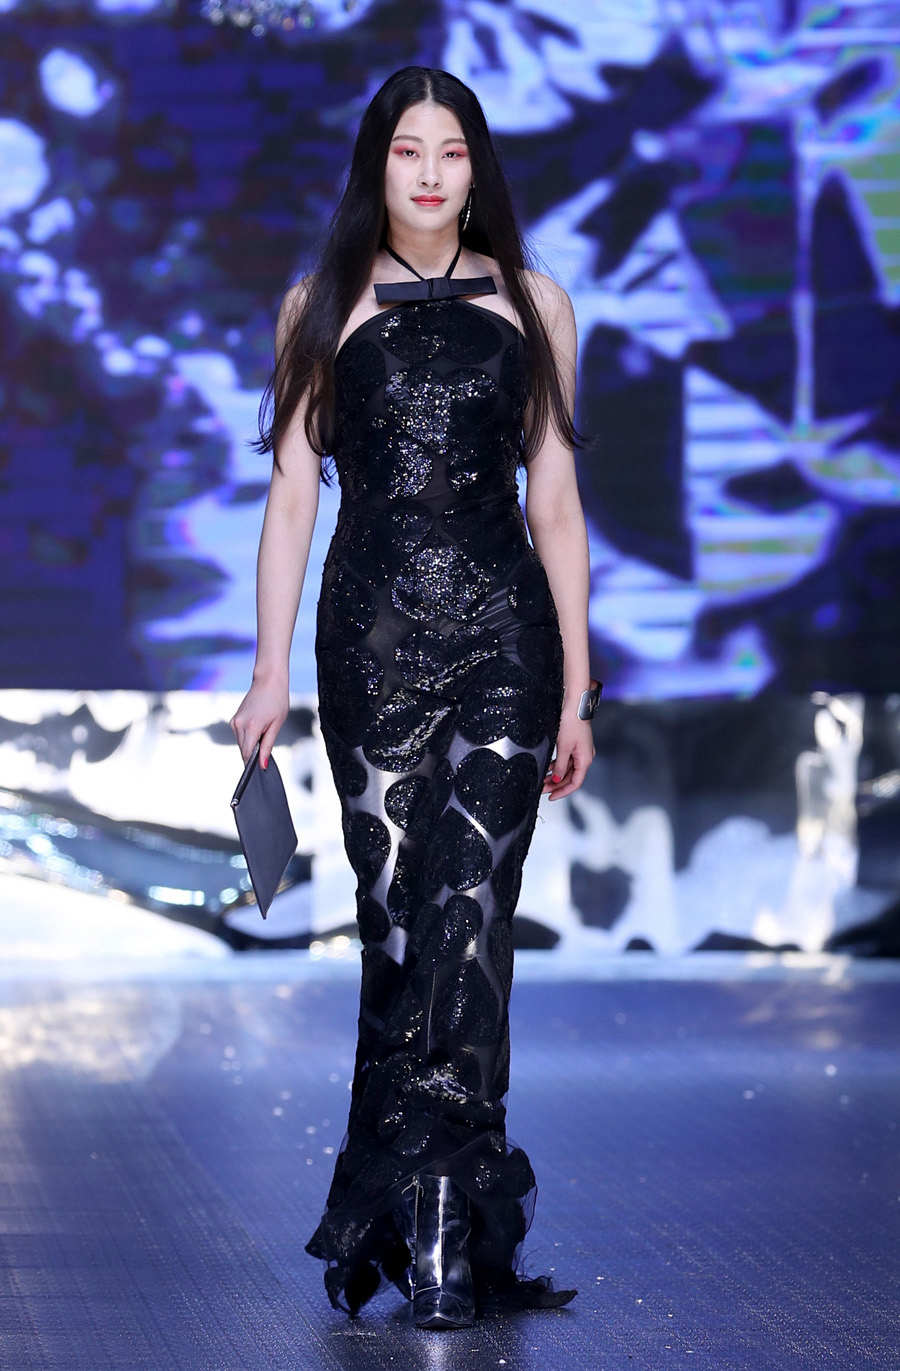 Creations presented during fashion show in China's Shandong